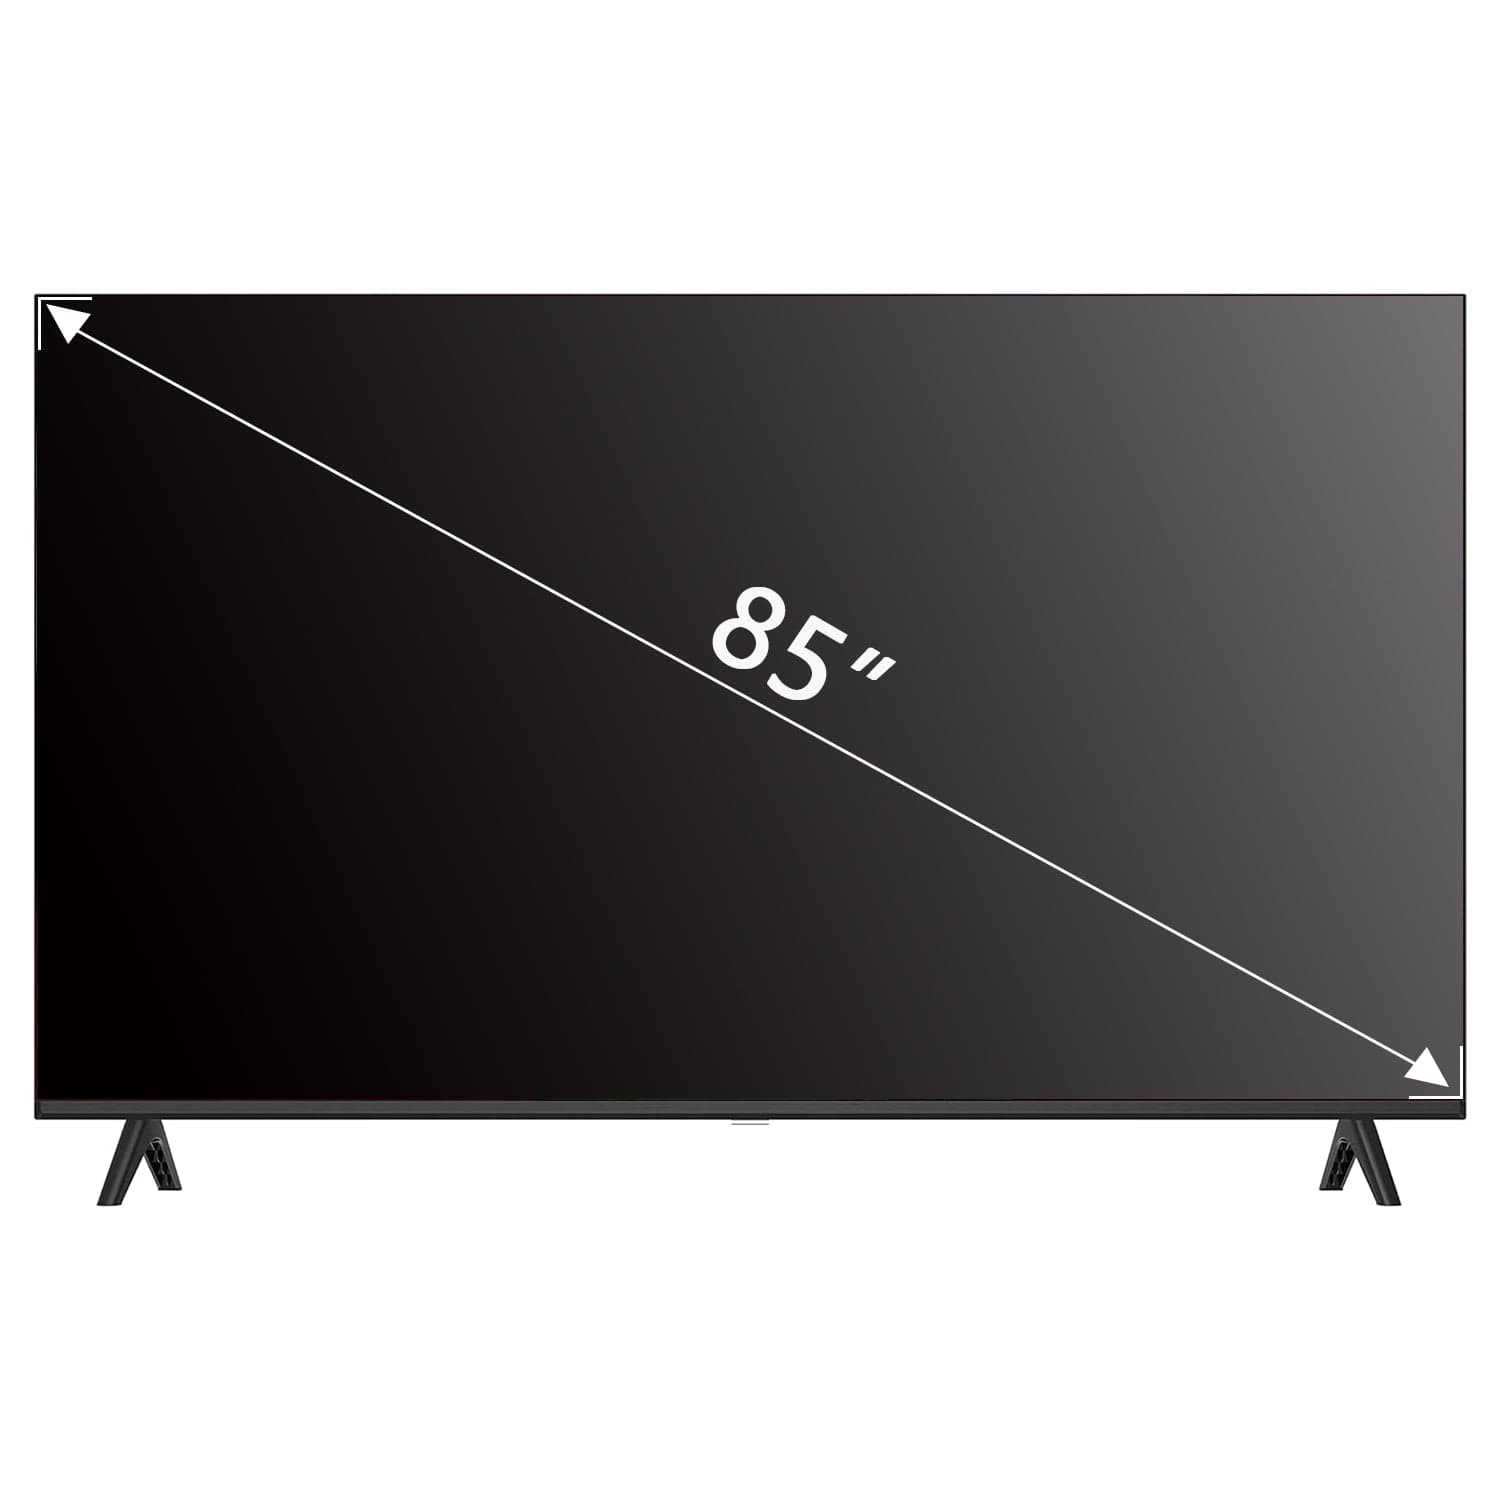 ZeroDamage Clear Screen Protector for most 85" TVs